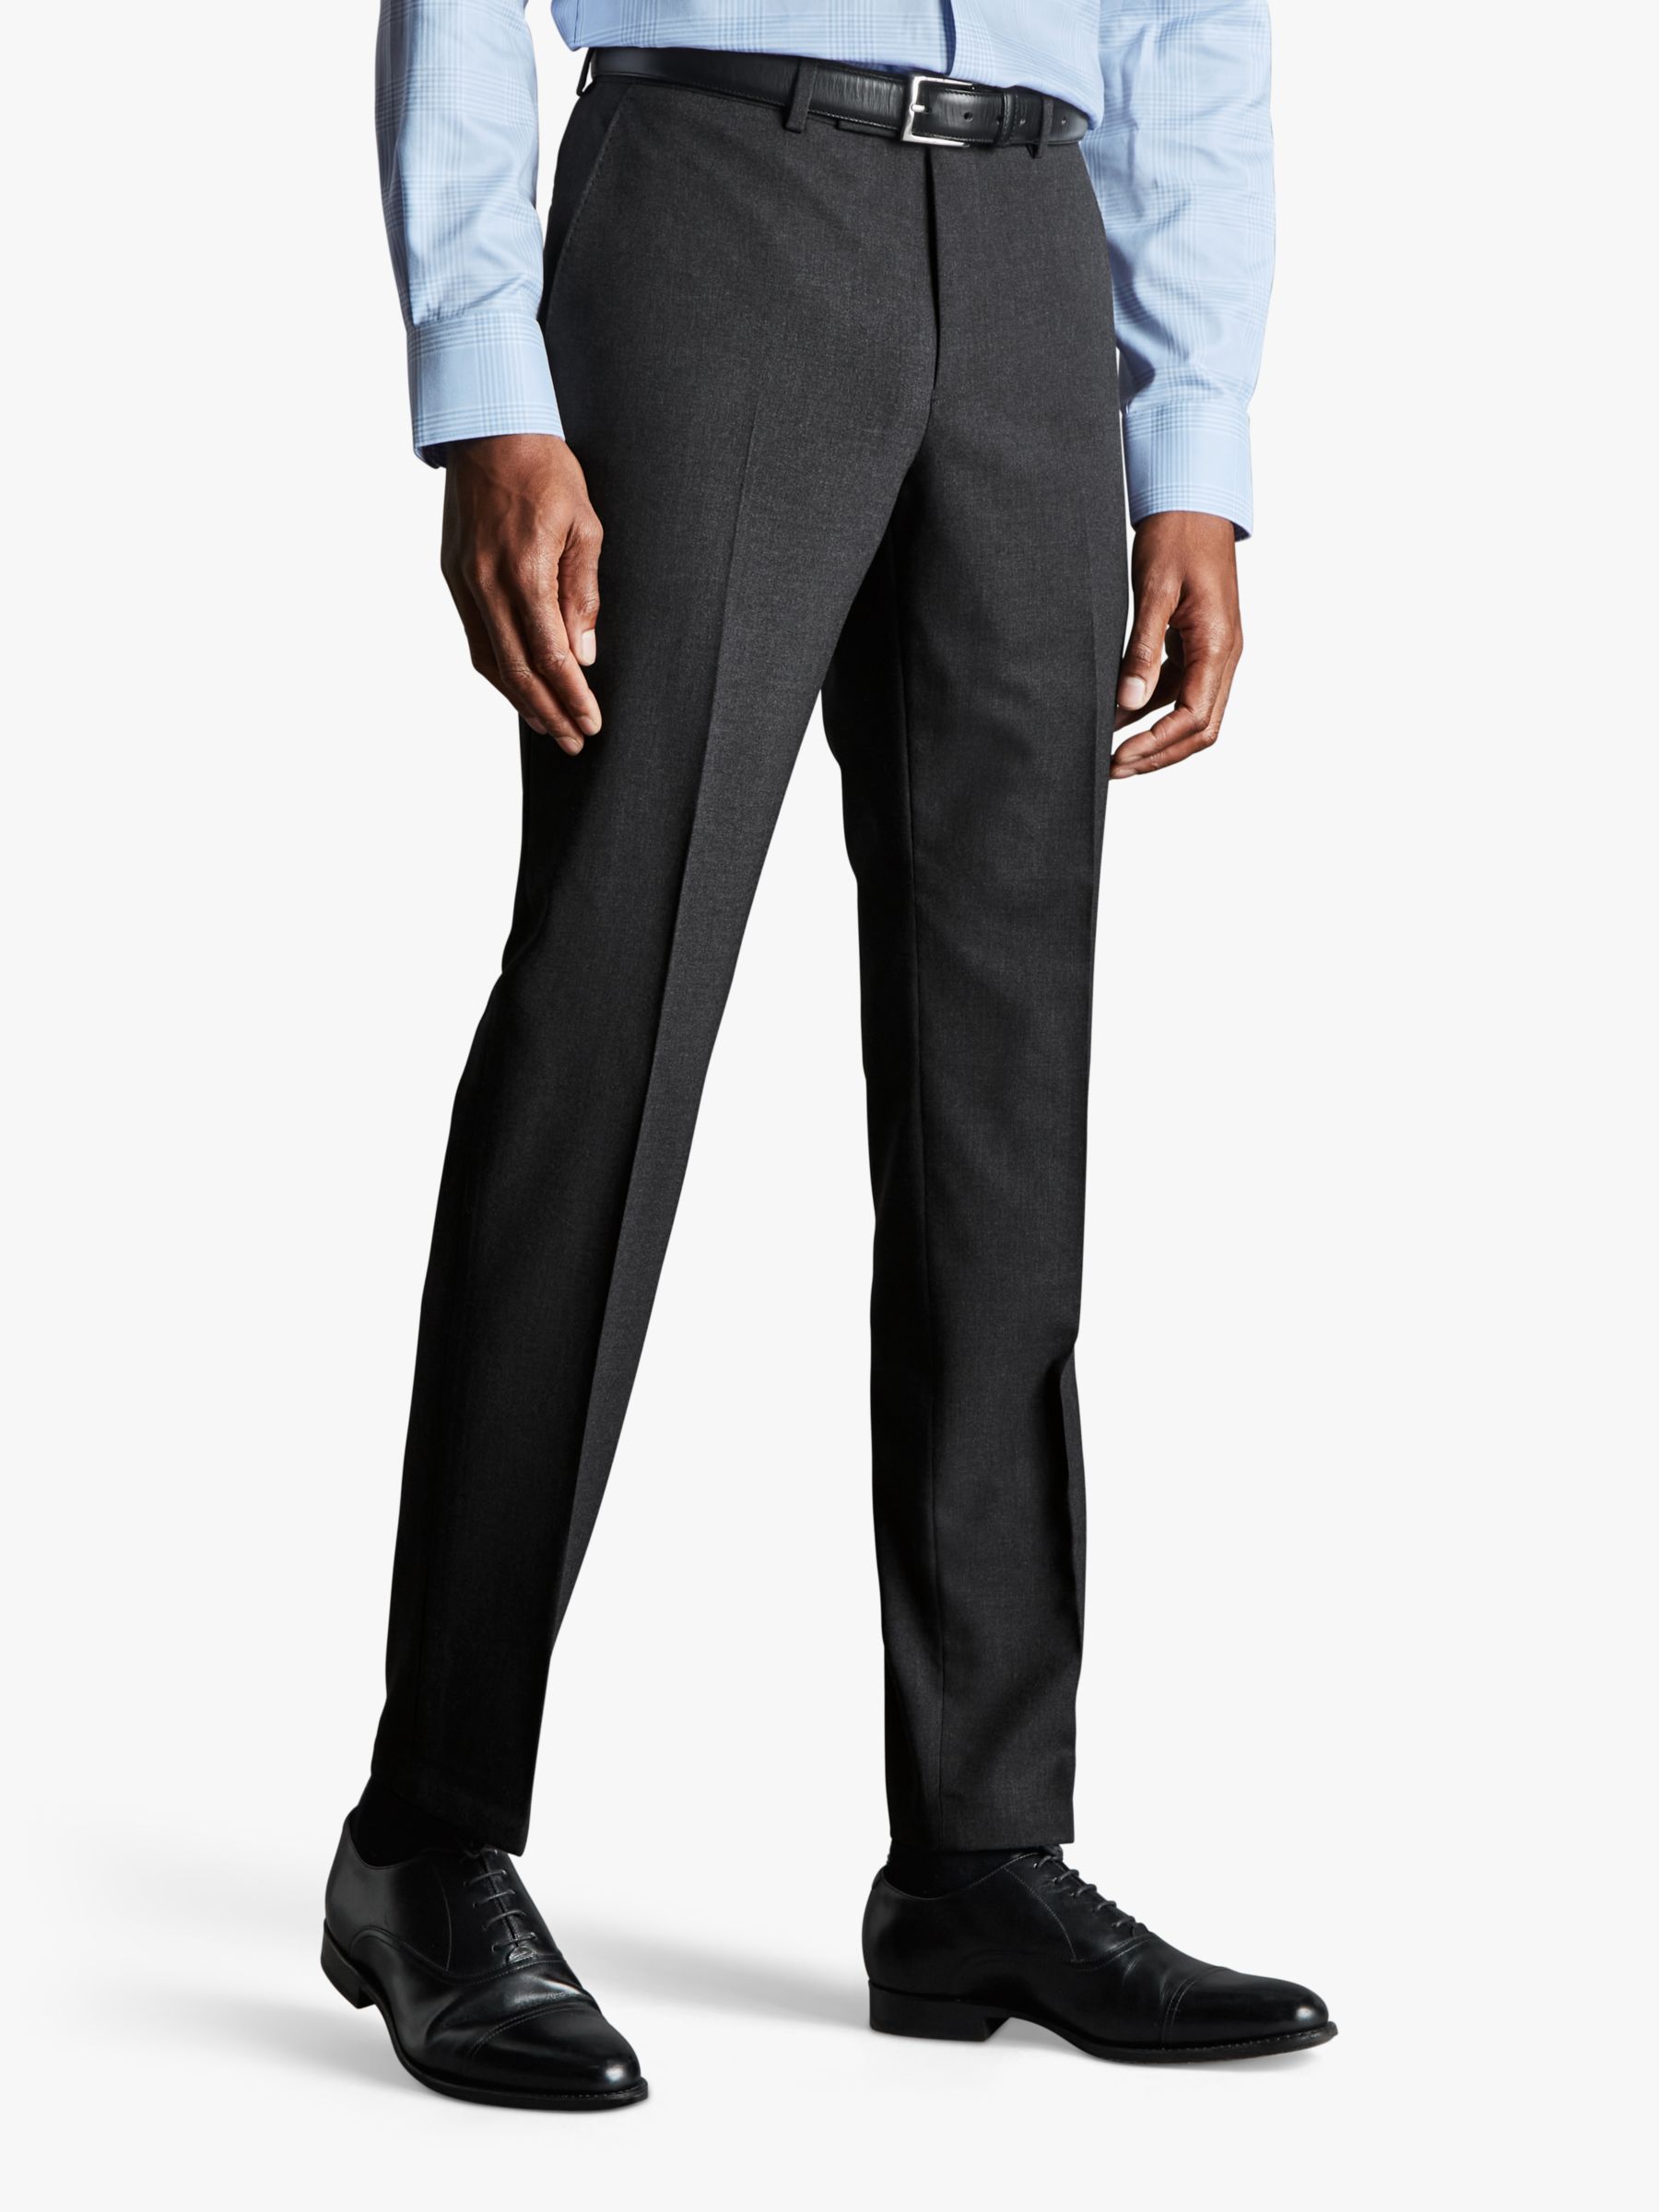 Charles Tyrwhitt Slim Fit Ultimate Suit Trousers, Charcoal Grey at John ...